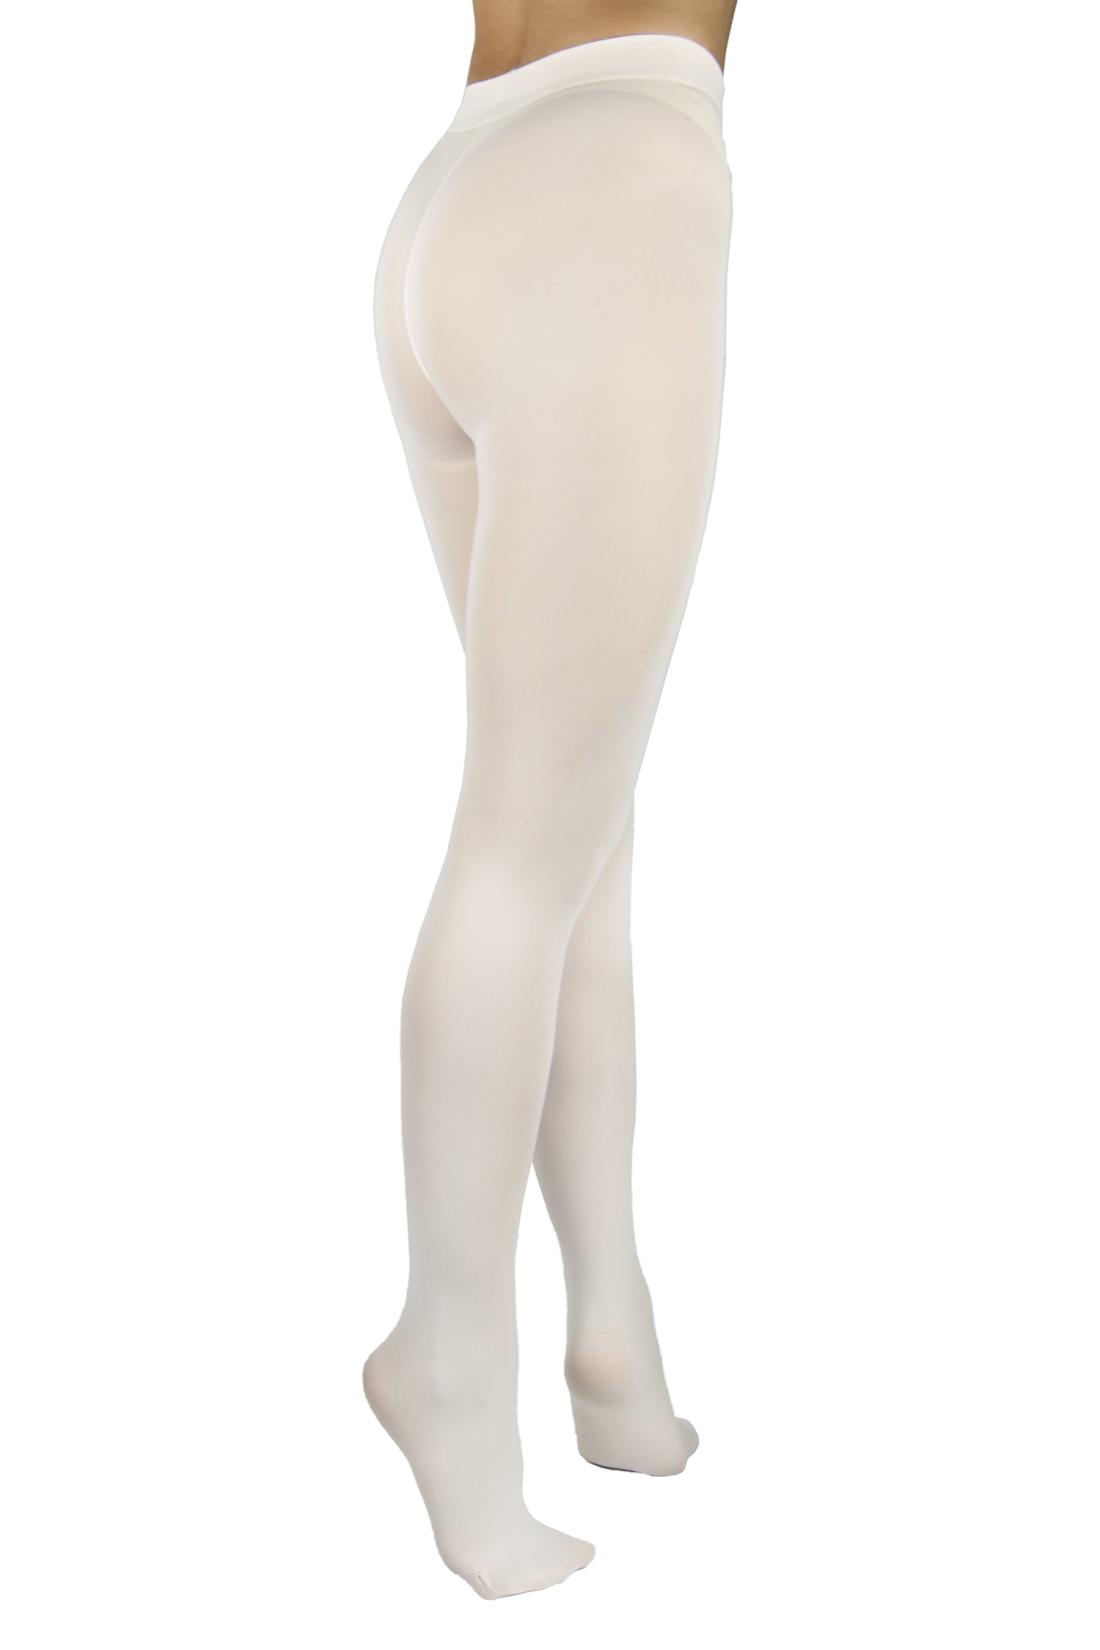 Basic Pink Footed Dance Lymat Tights ballet dance